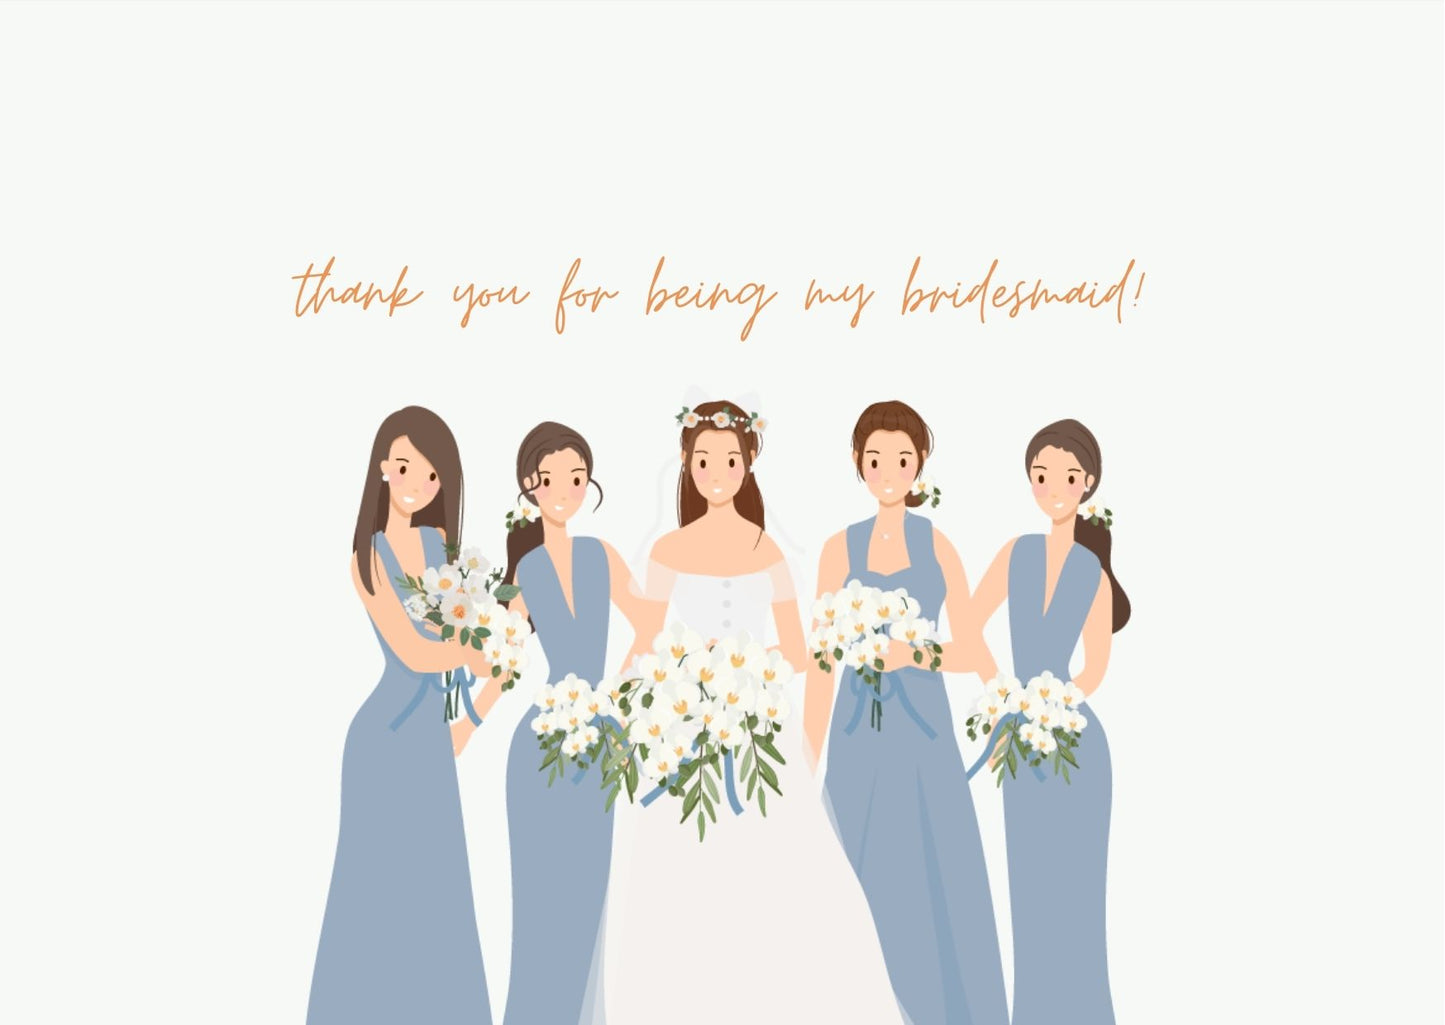 Thank you for being my bridesmaid!